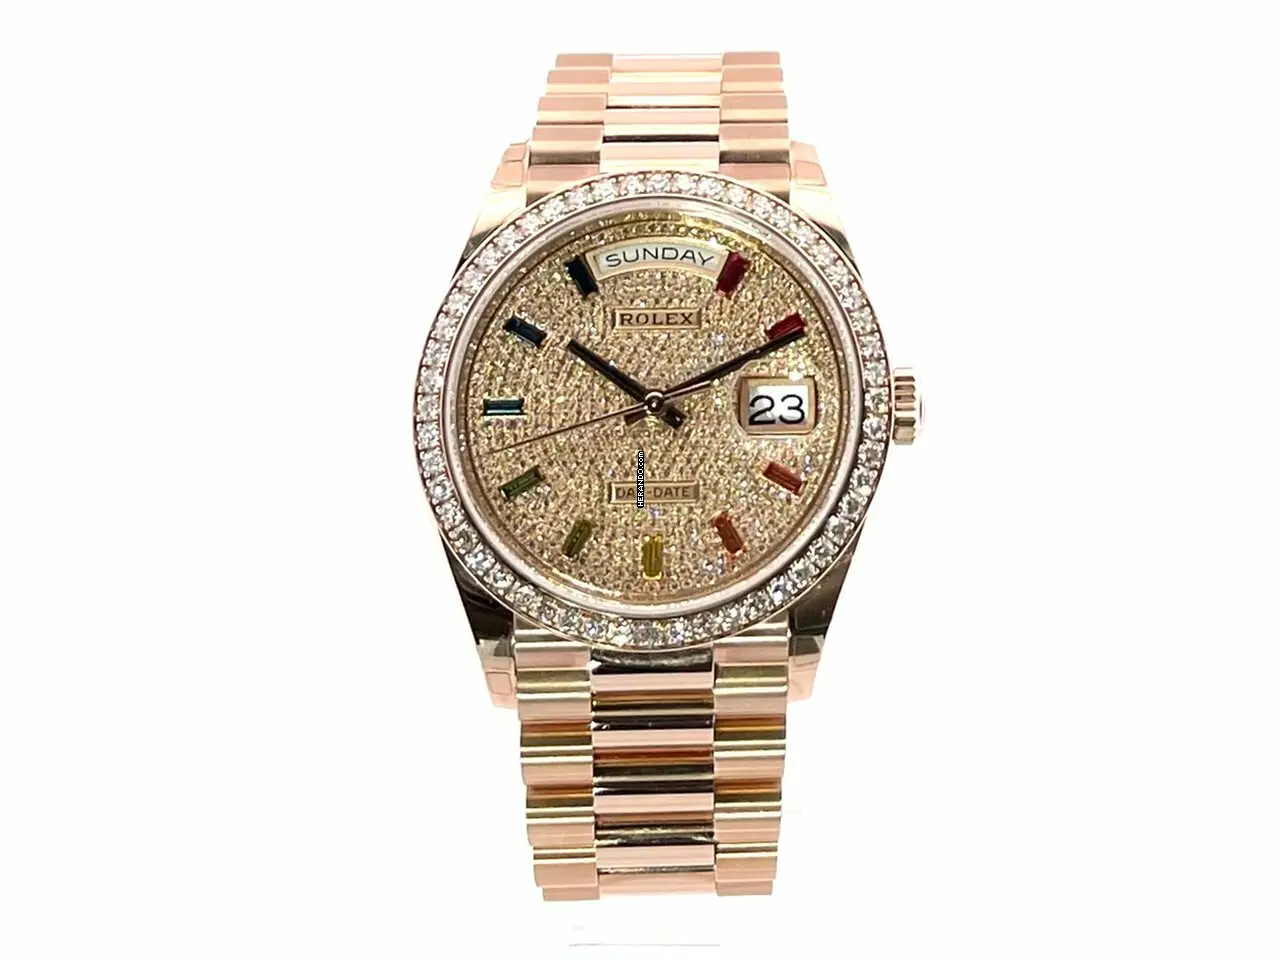 watches-328769-28453511-pf91orrfp9xt29yjcqiiuzp1-ExtraLarge.webp